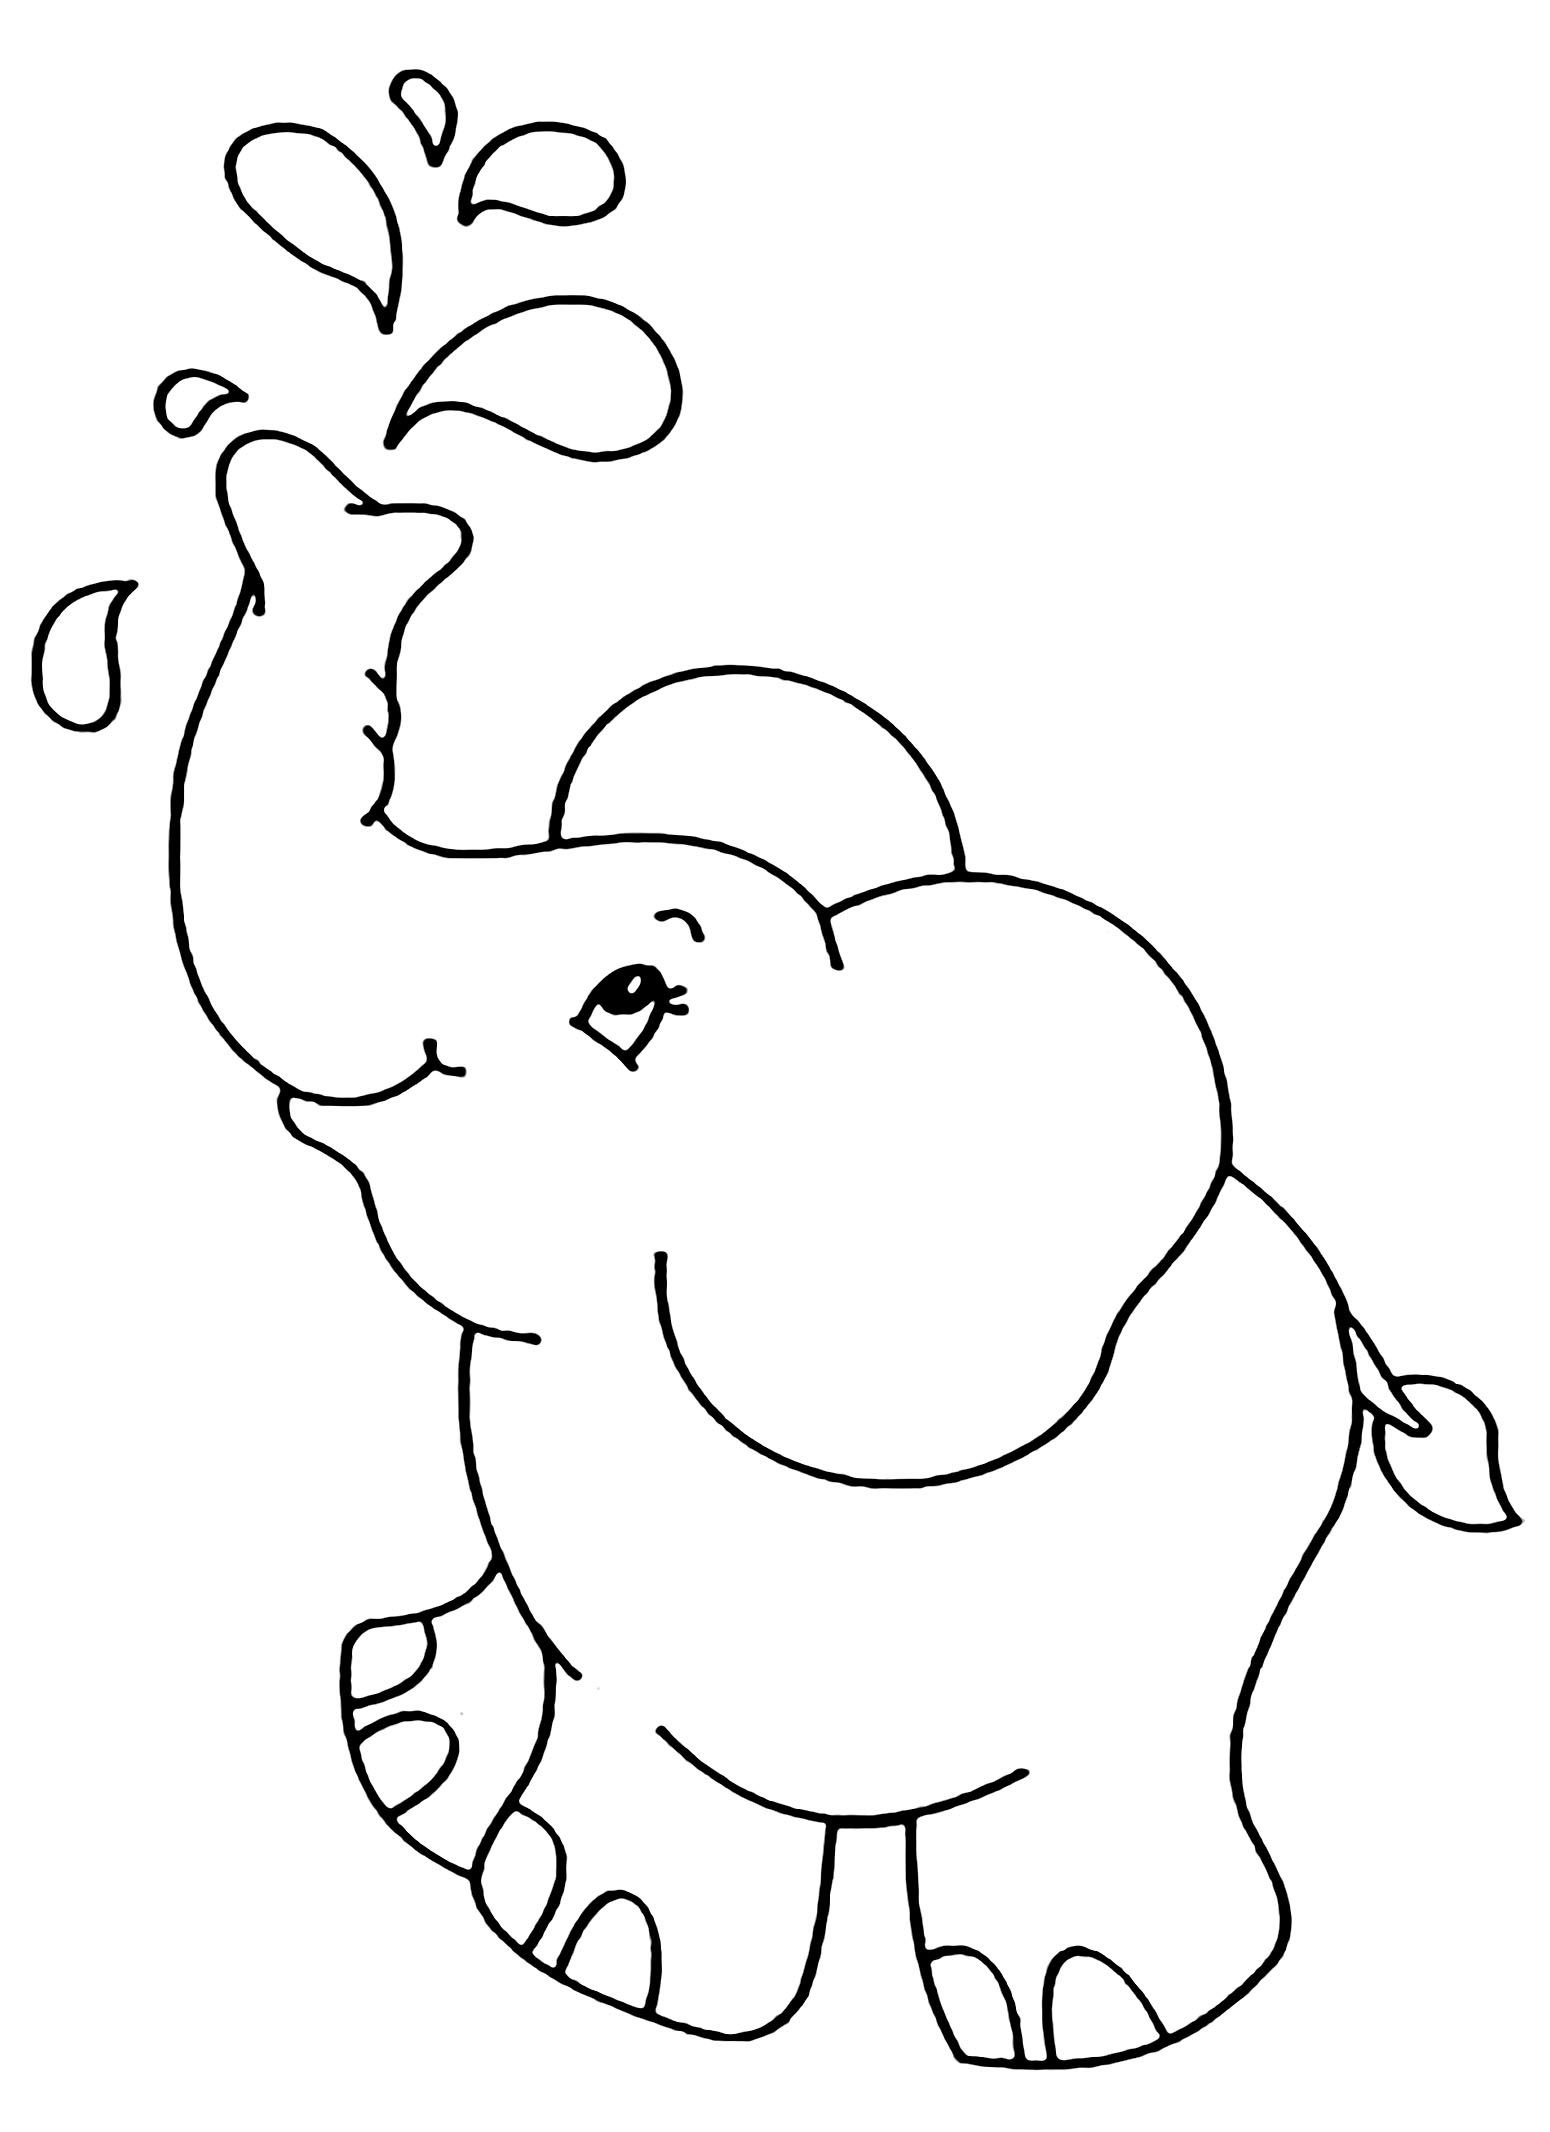 Download Elephants free to color for kids - Elephants Kids Coloring ...